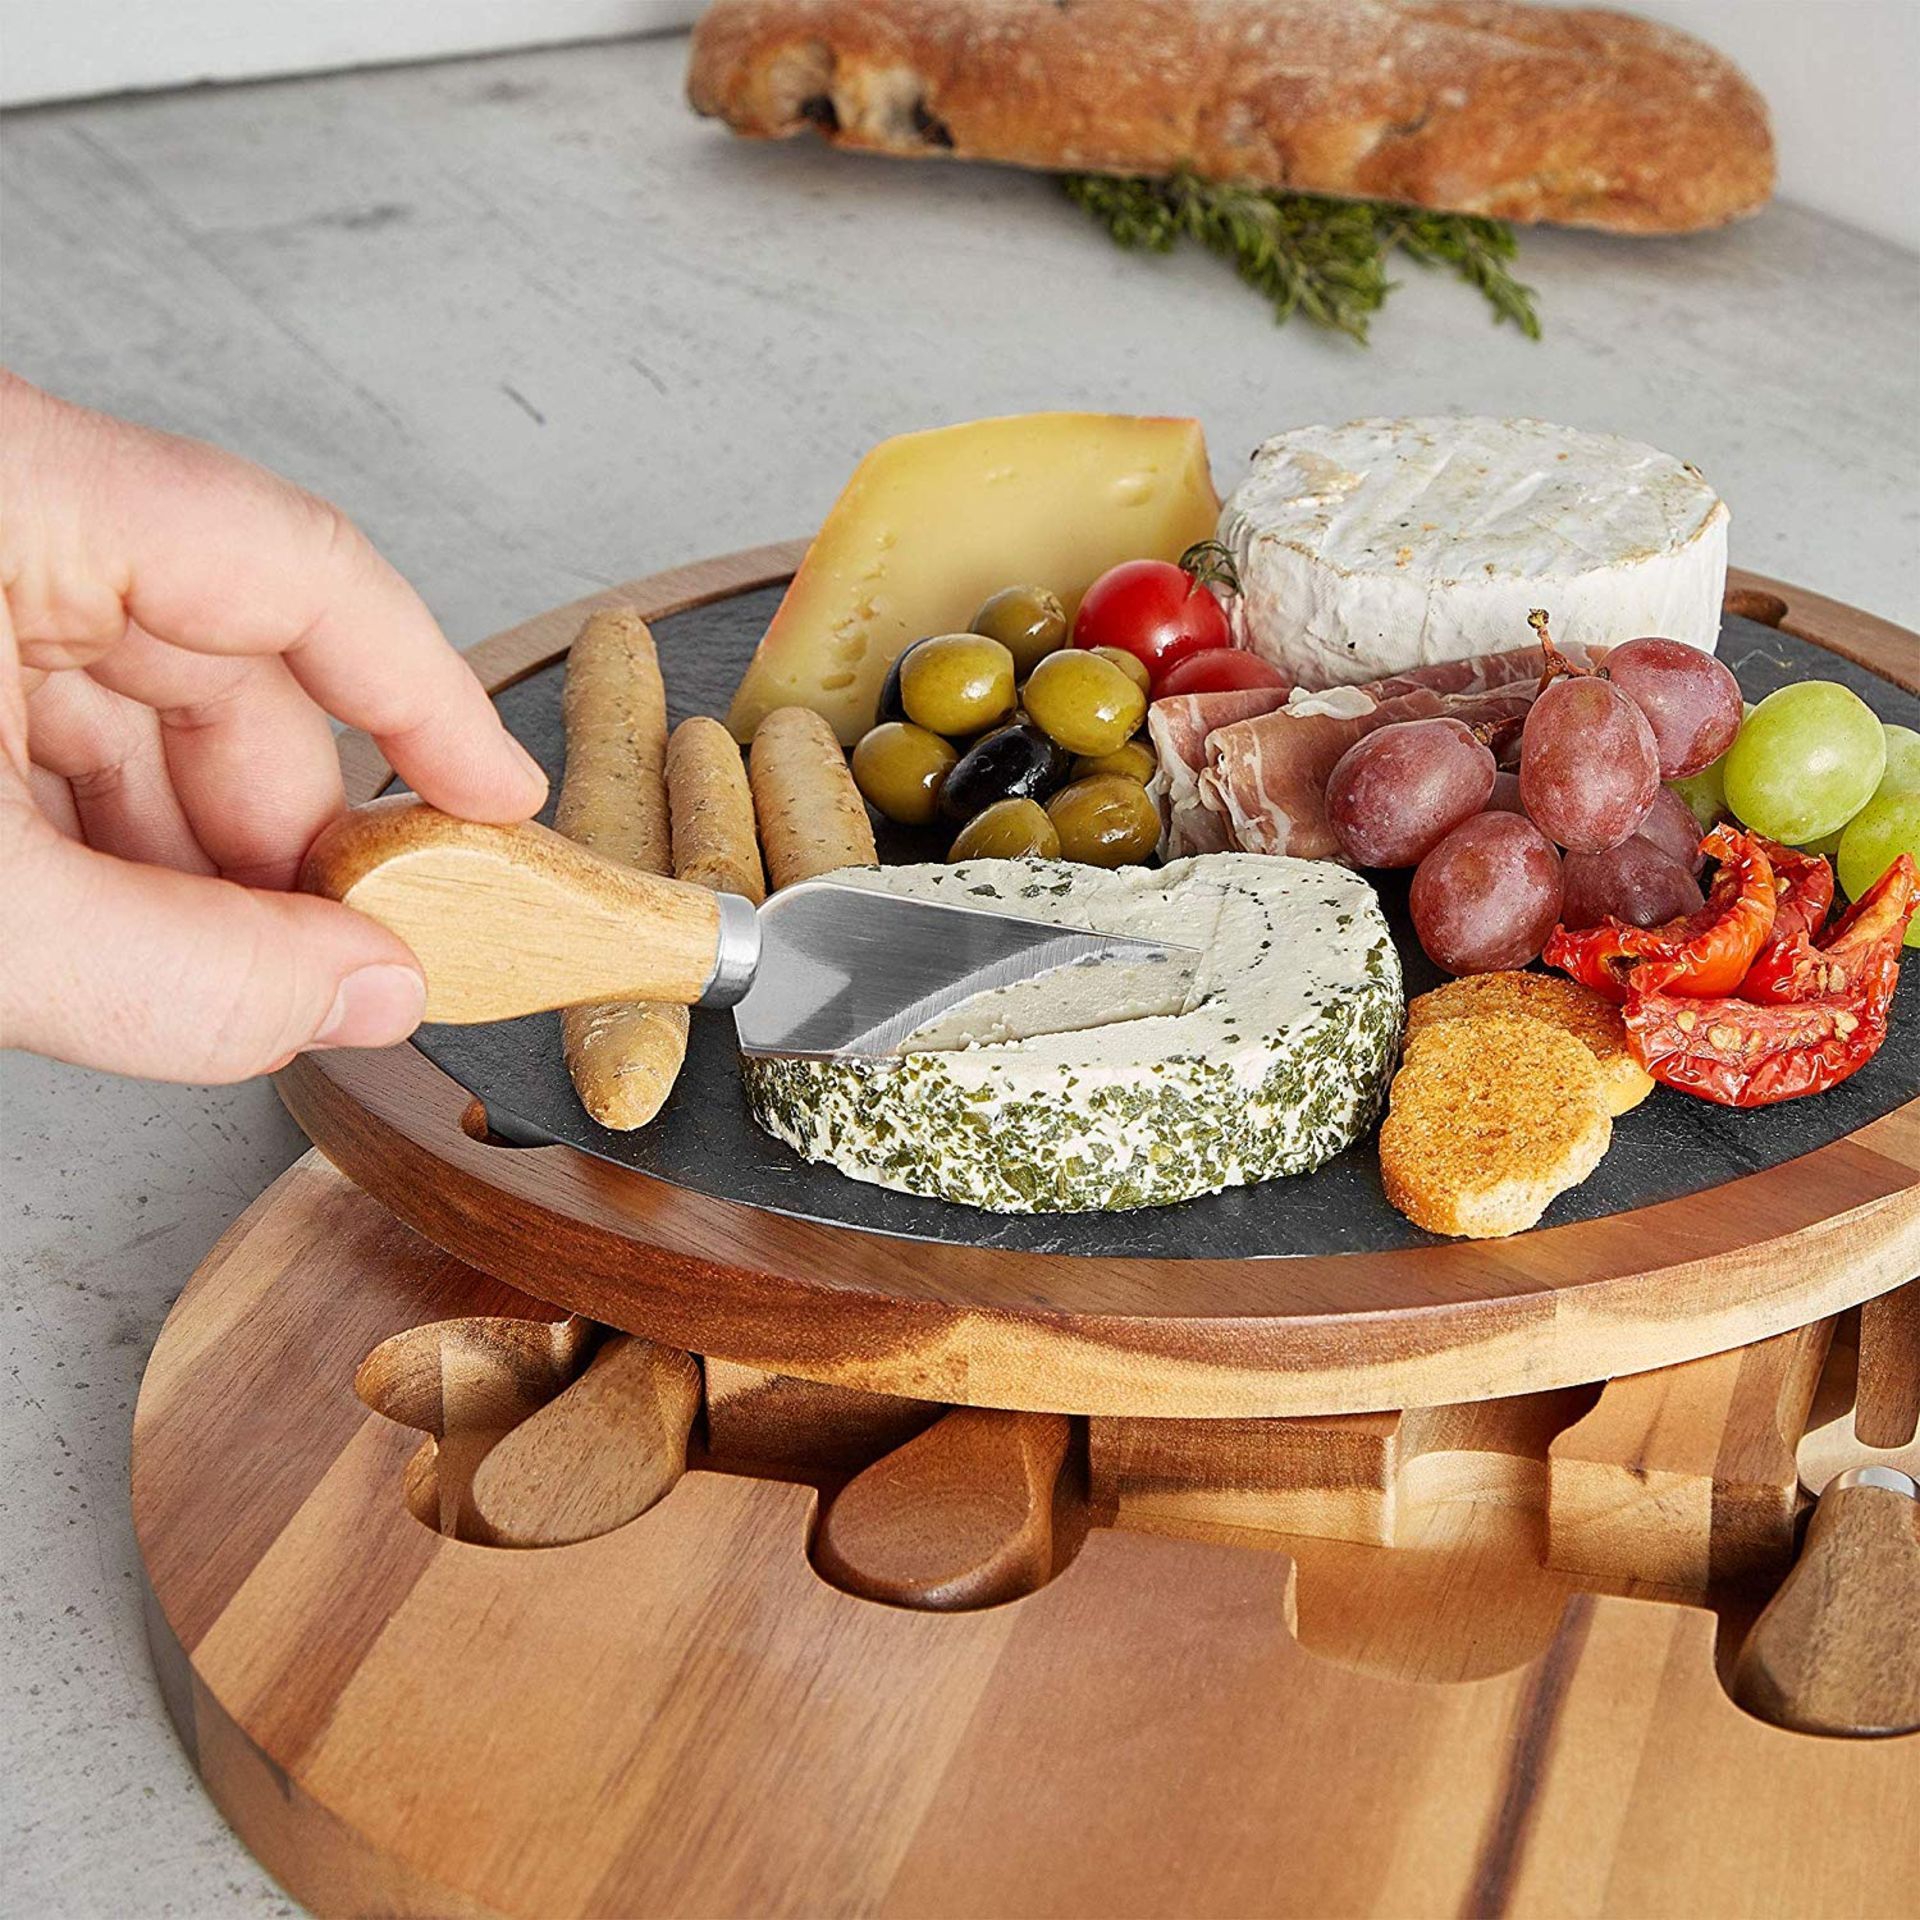 (S370) Cheese Boards with Knives Sets - Bamboo, Slate, Slide-Out Drawers, Specialist Knife Sets... - Image 3 of 4